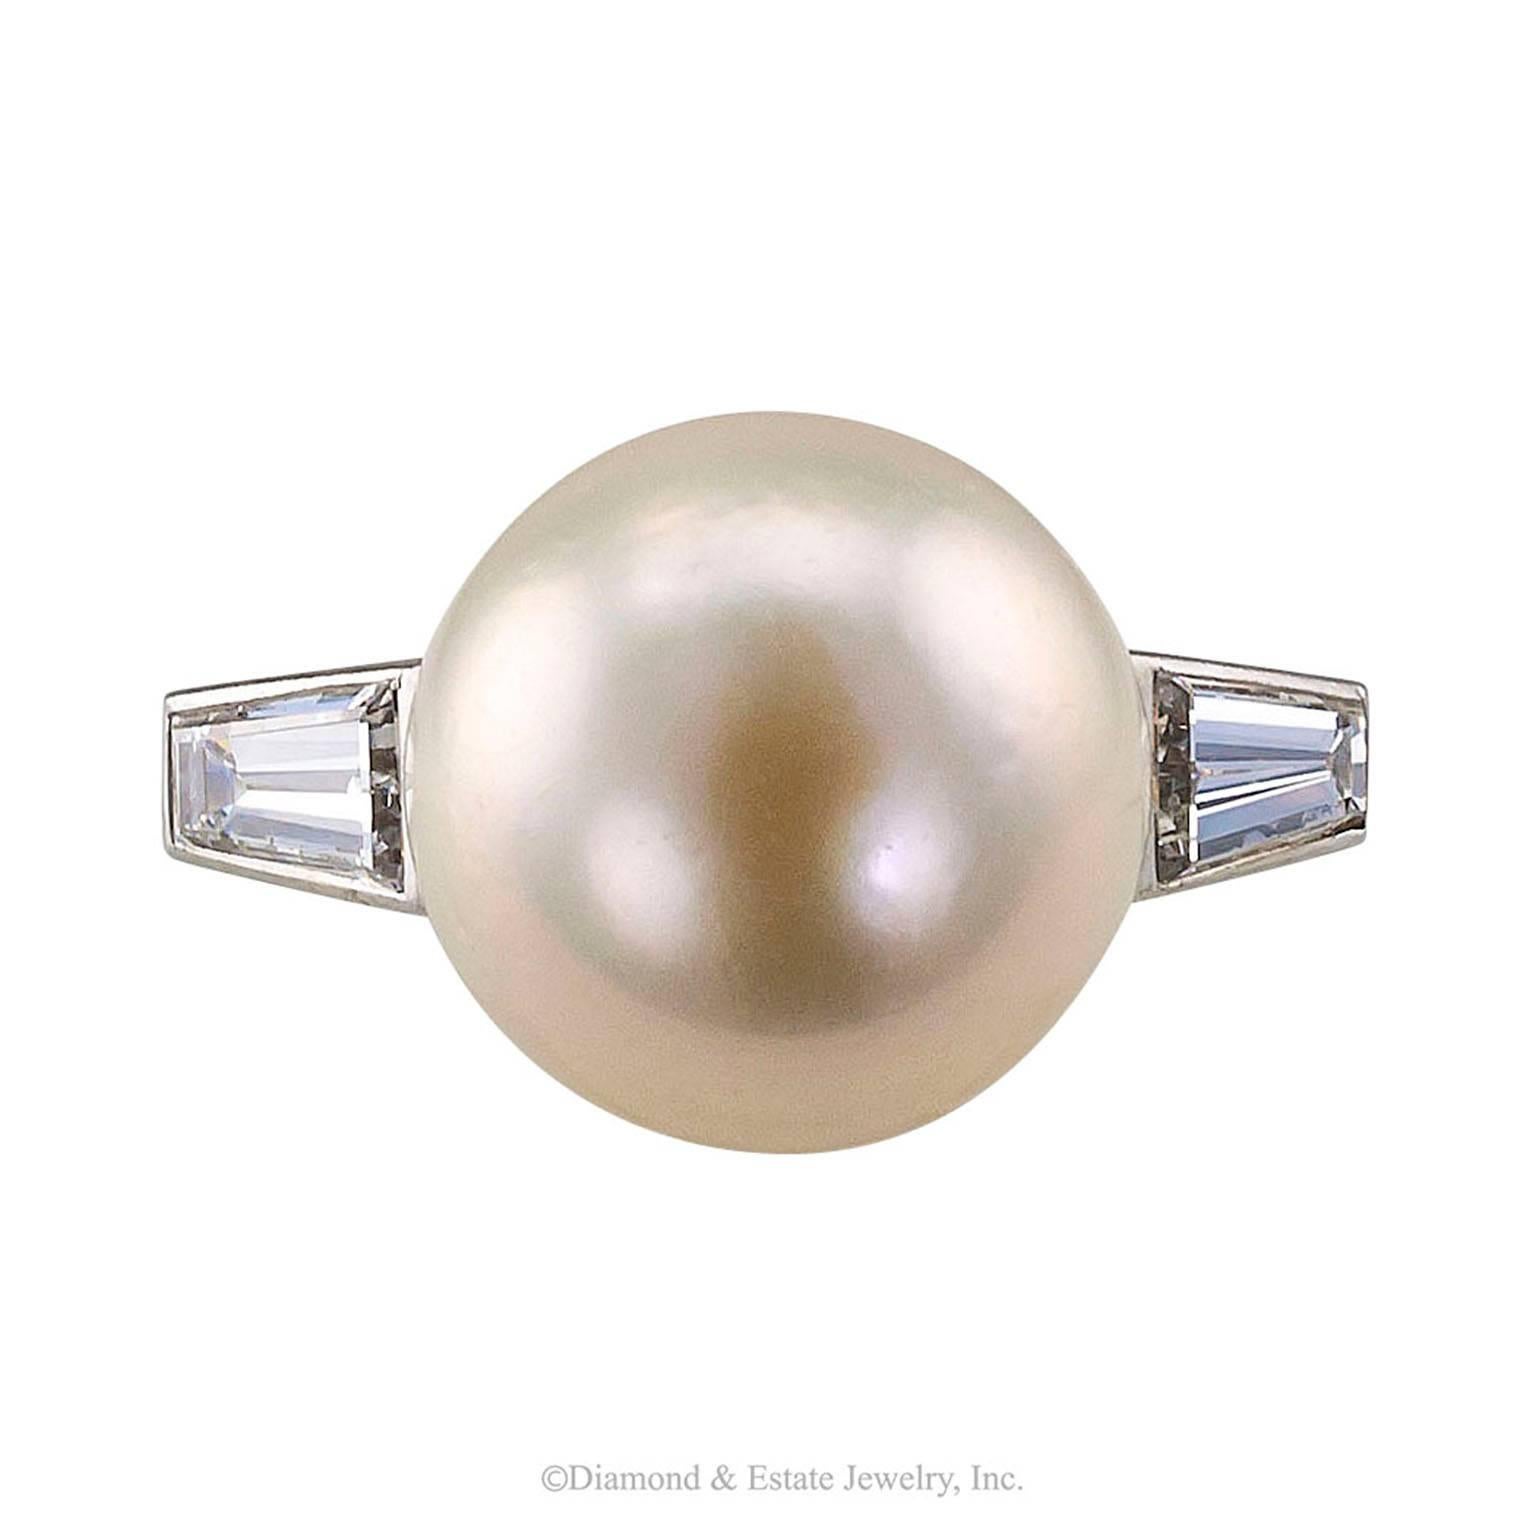 Mid-century French South Sea Pearl 11.4 mm Diamond Platinum Ring

French mid-century south sea pearl and baguette diamond platinum ring circa 1950.   The quintessential platinum ring design from the 1950's is still riding high on the crest of